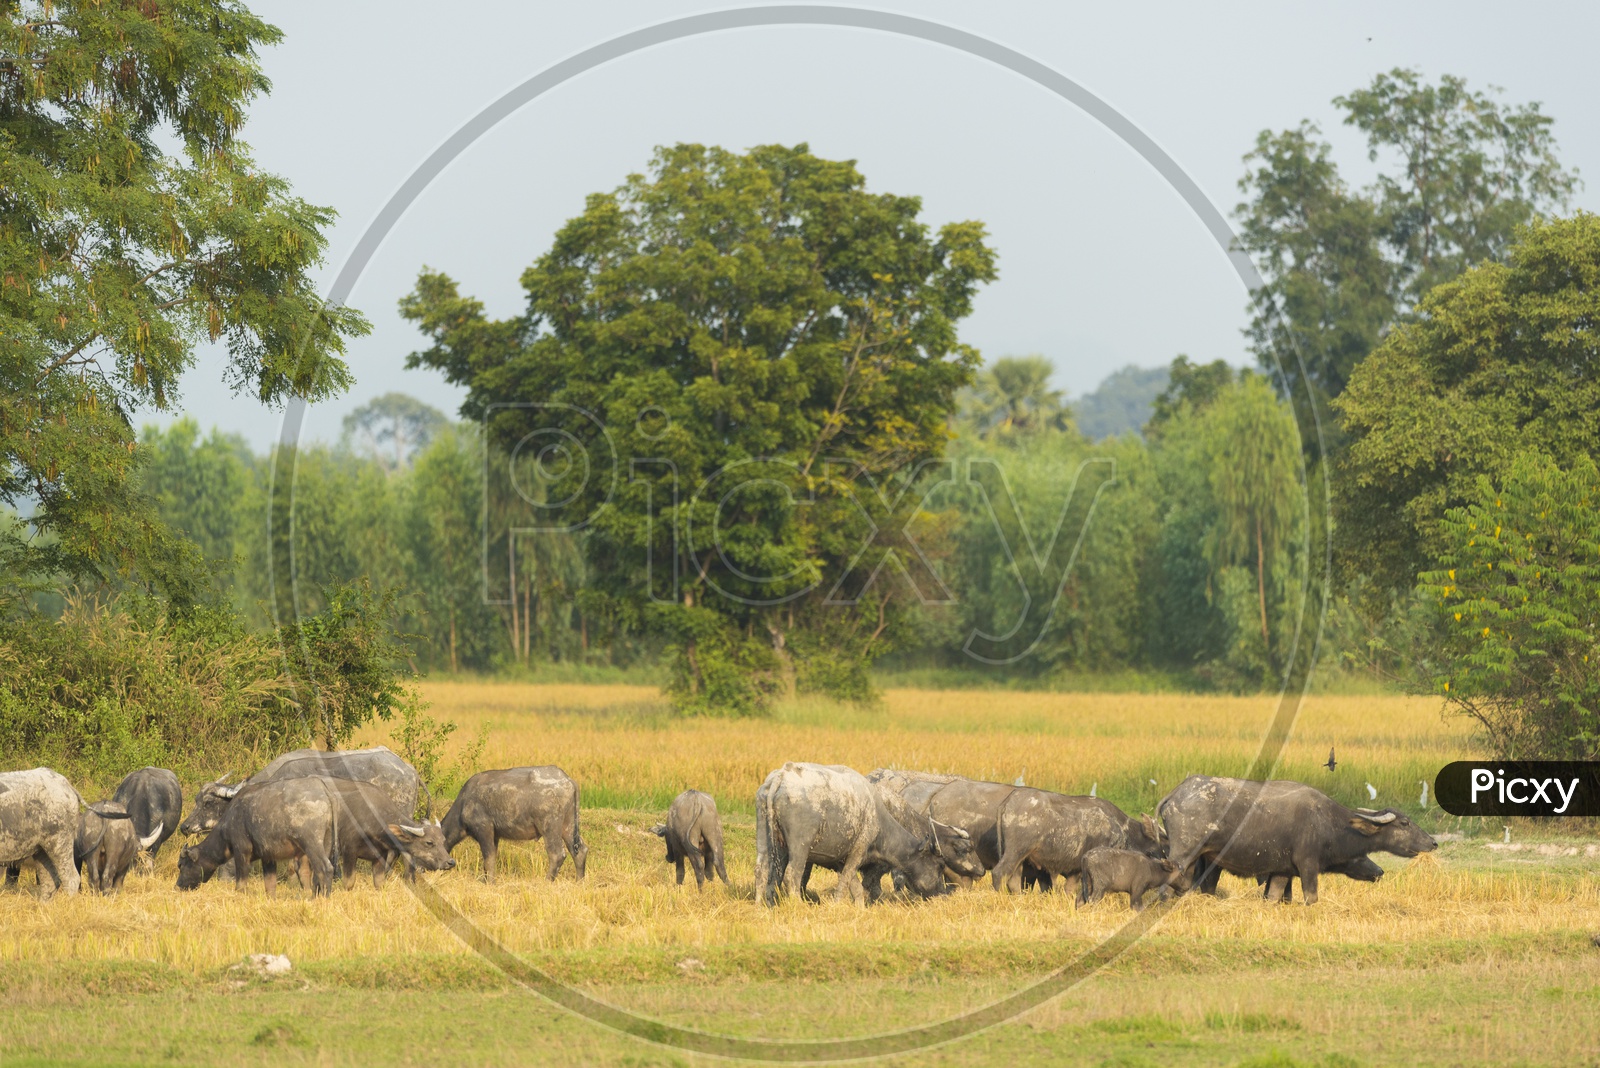 water buffaloes grazing in a Field, Thailand